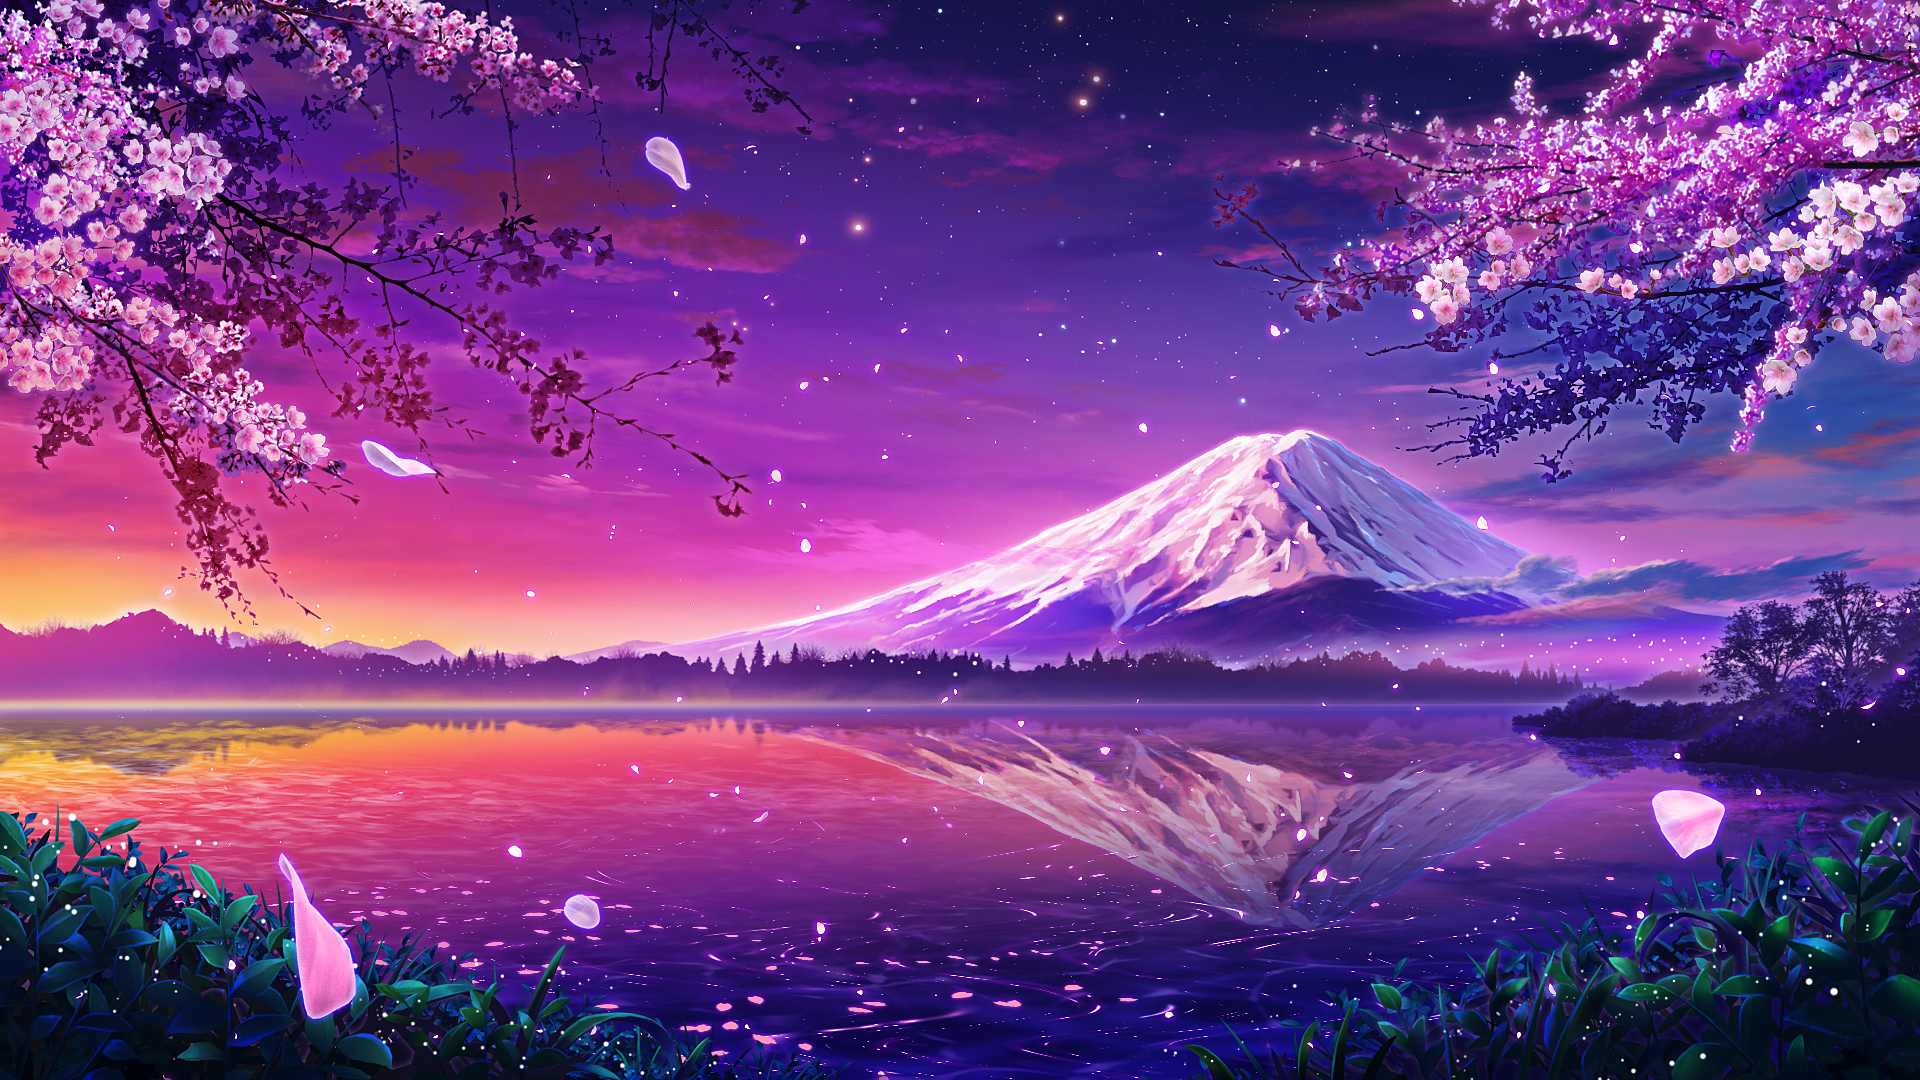 Anime 1920x1080 anime Pixiv cherry blossom petals reflection water sunset mountains snow nature sunset glow sky